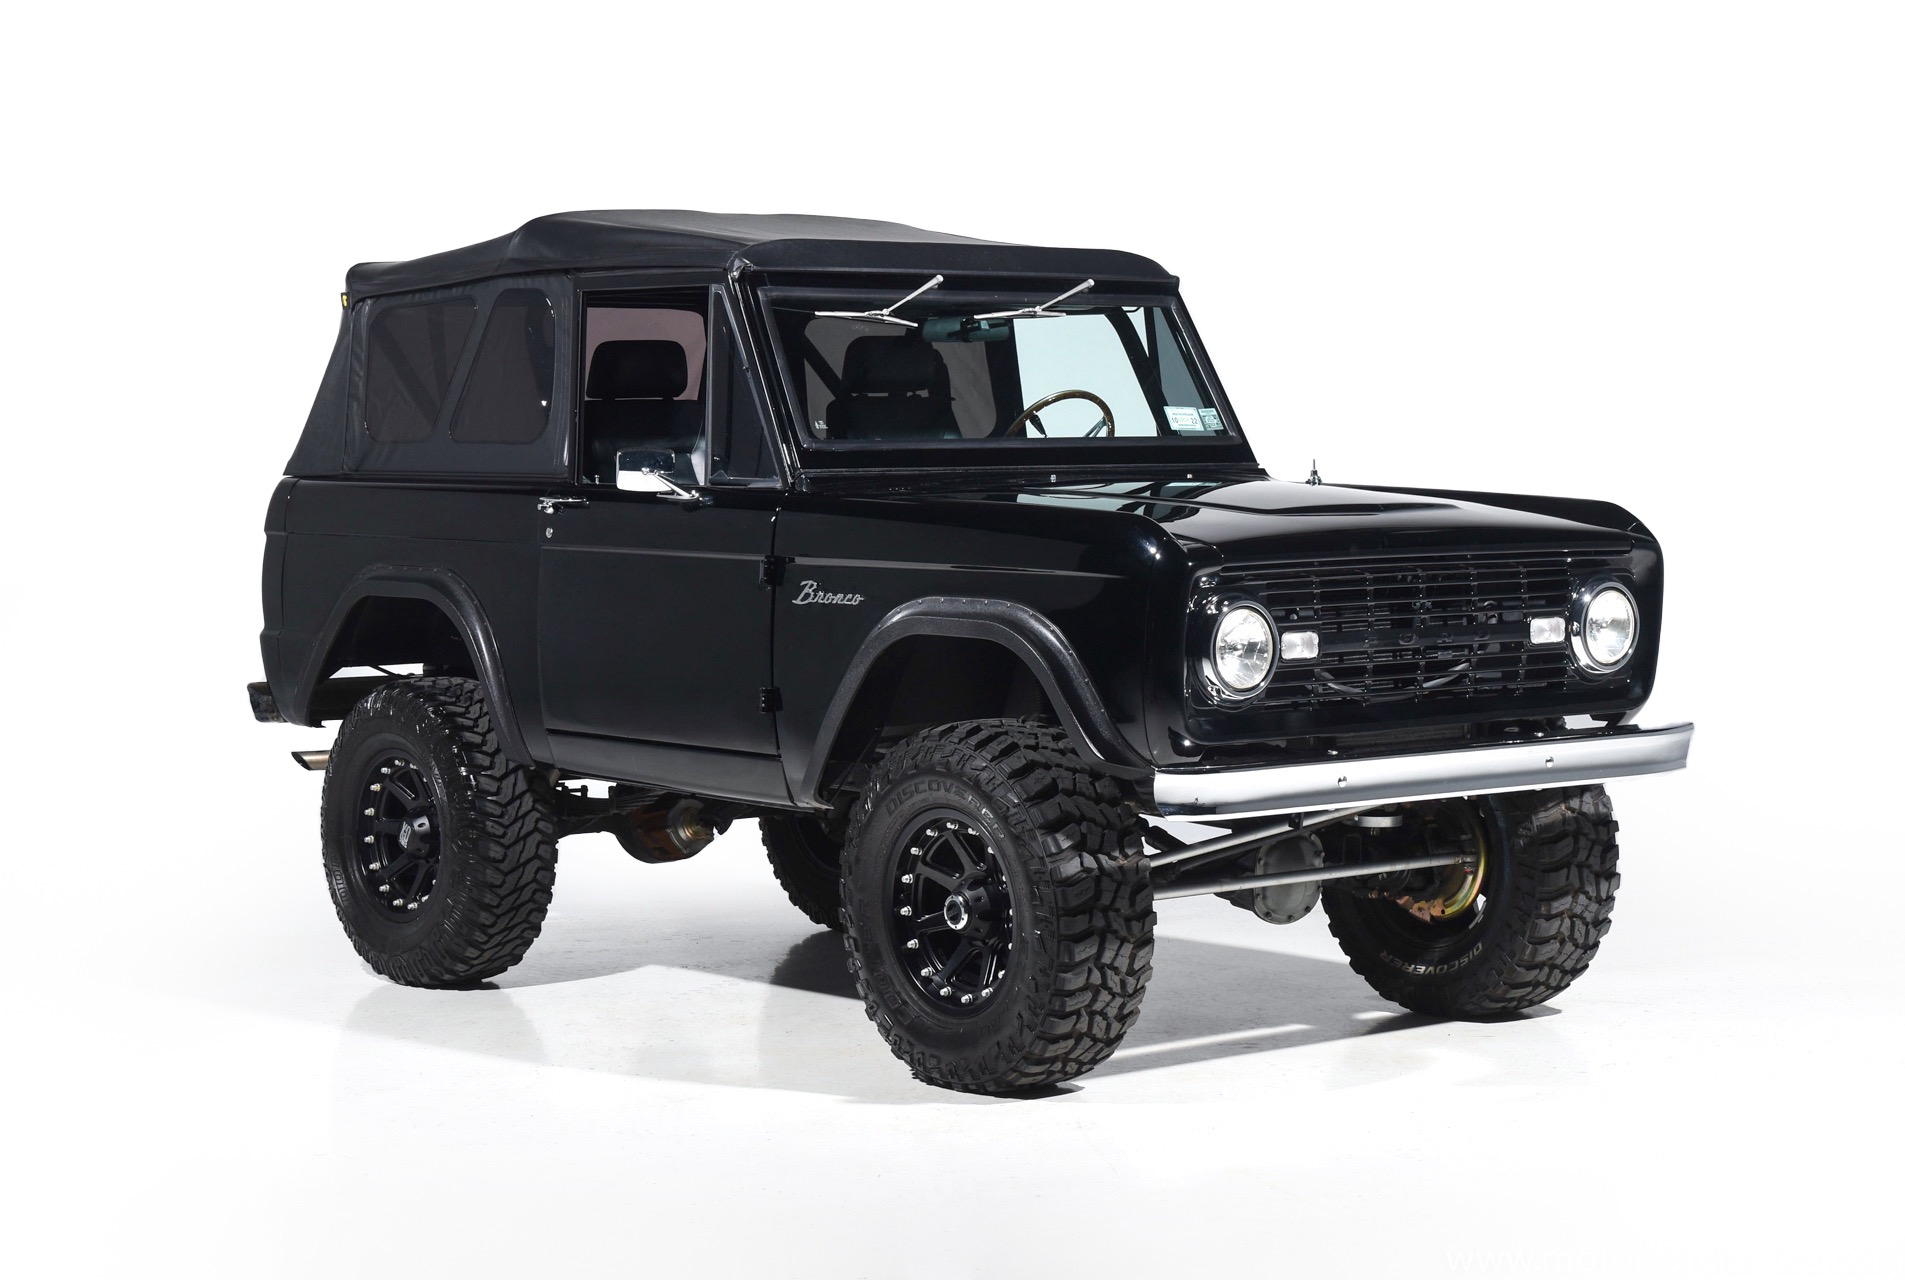 1966 Ford Bronco For Sale | Vintage Driving Machines